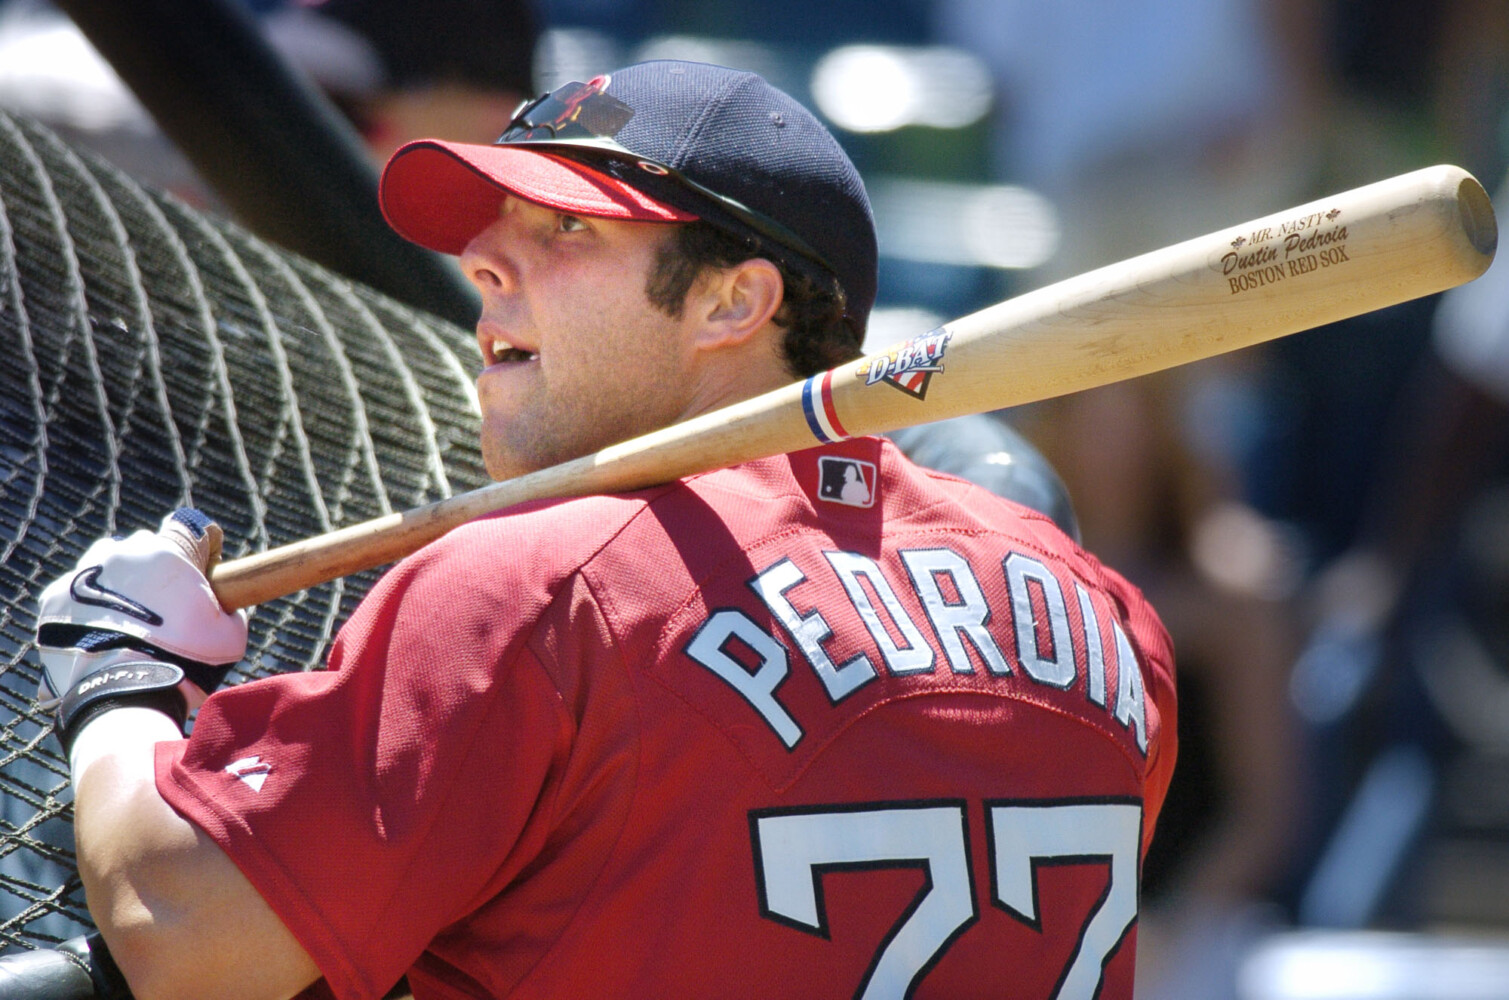 Is Dustin Pedroia Having the Worst Year of His Career?